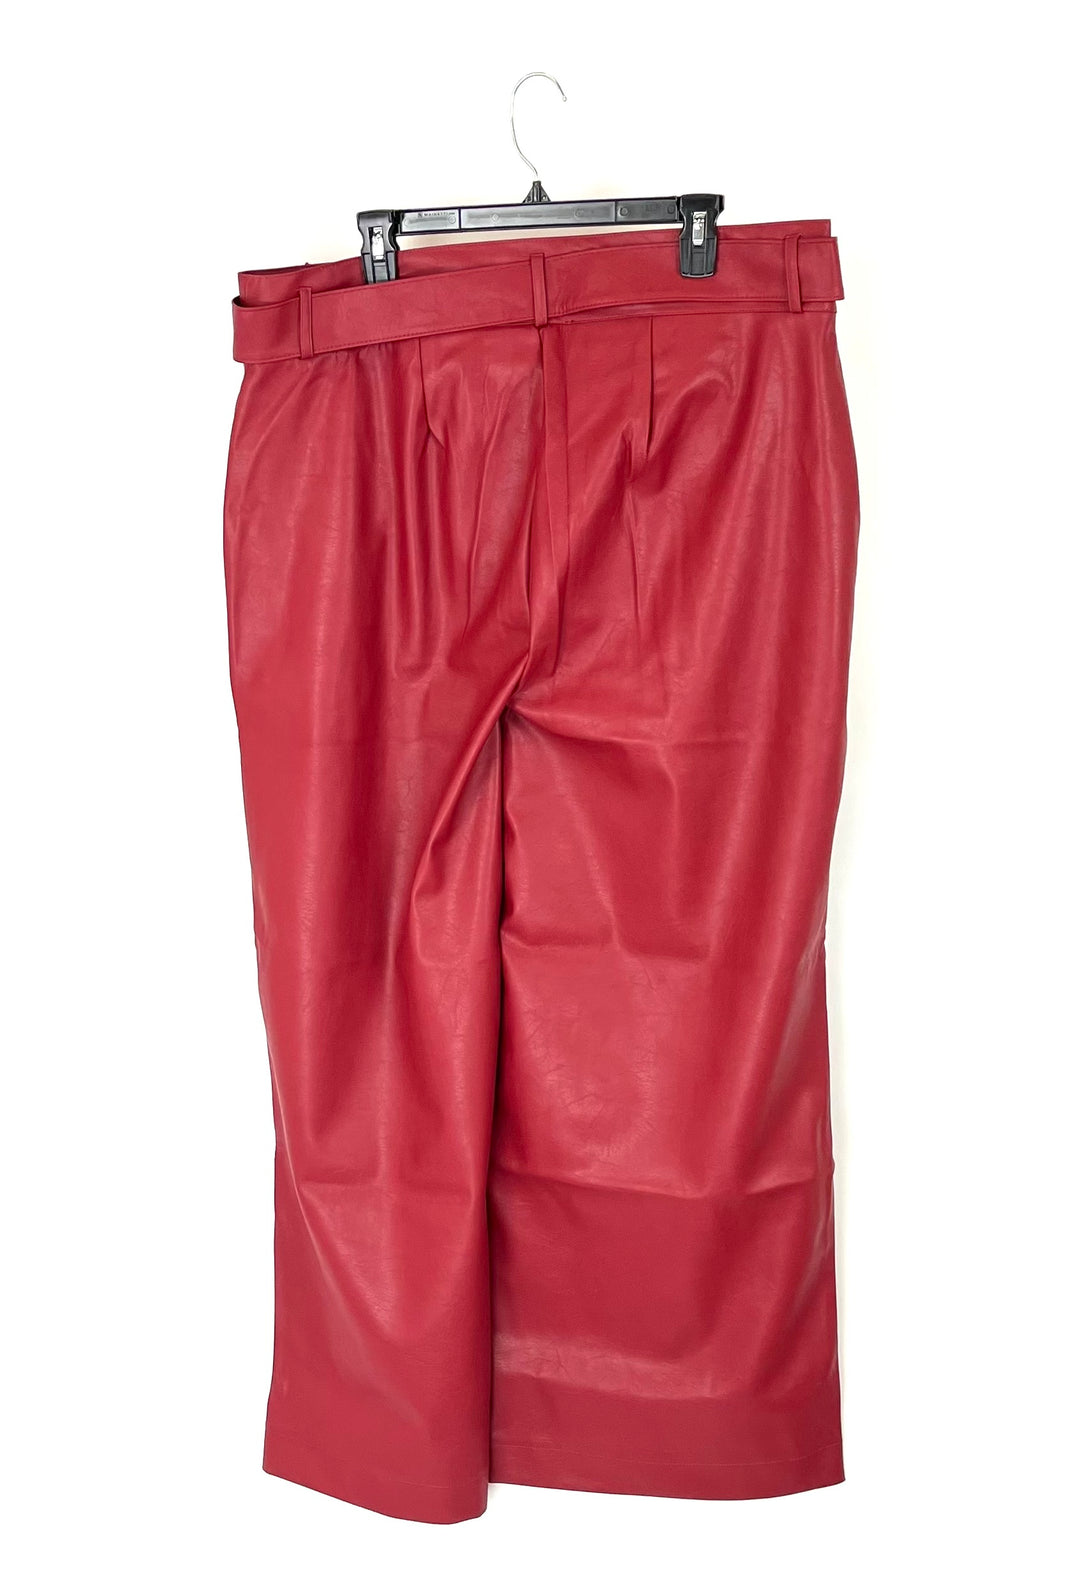 Red Faux Leather Wide Leg Pants - 14W